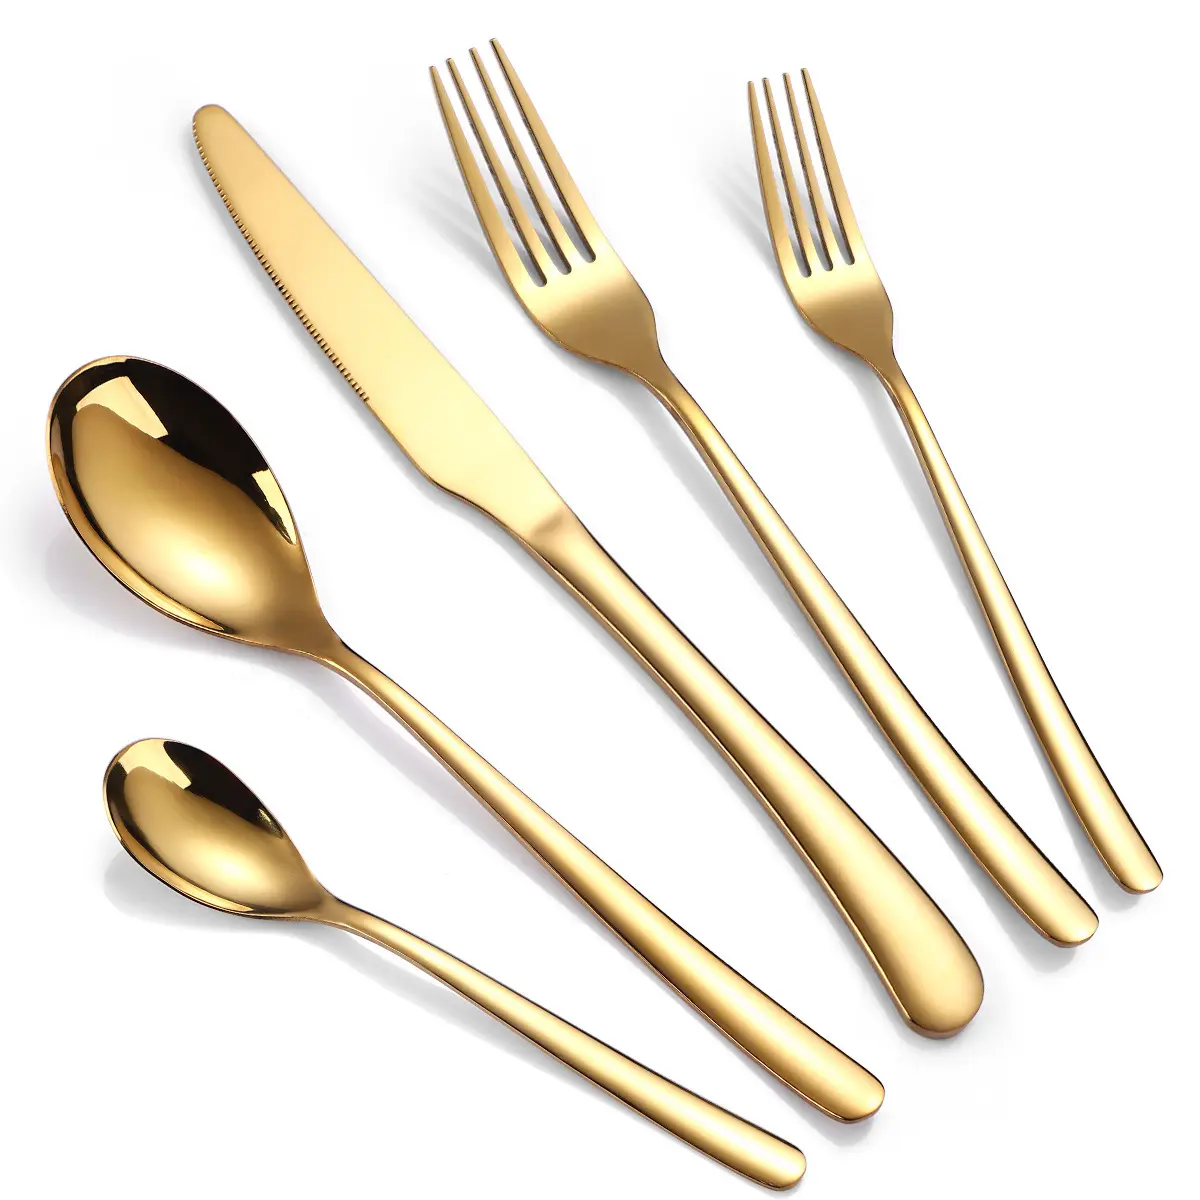 Luxury Gold Cutlery Set Dazzling Spoon And Fork Collection For Special Occasions